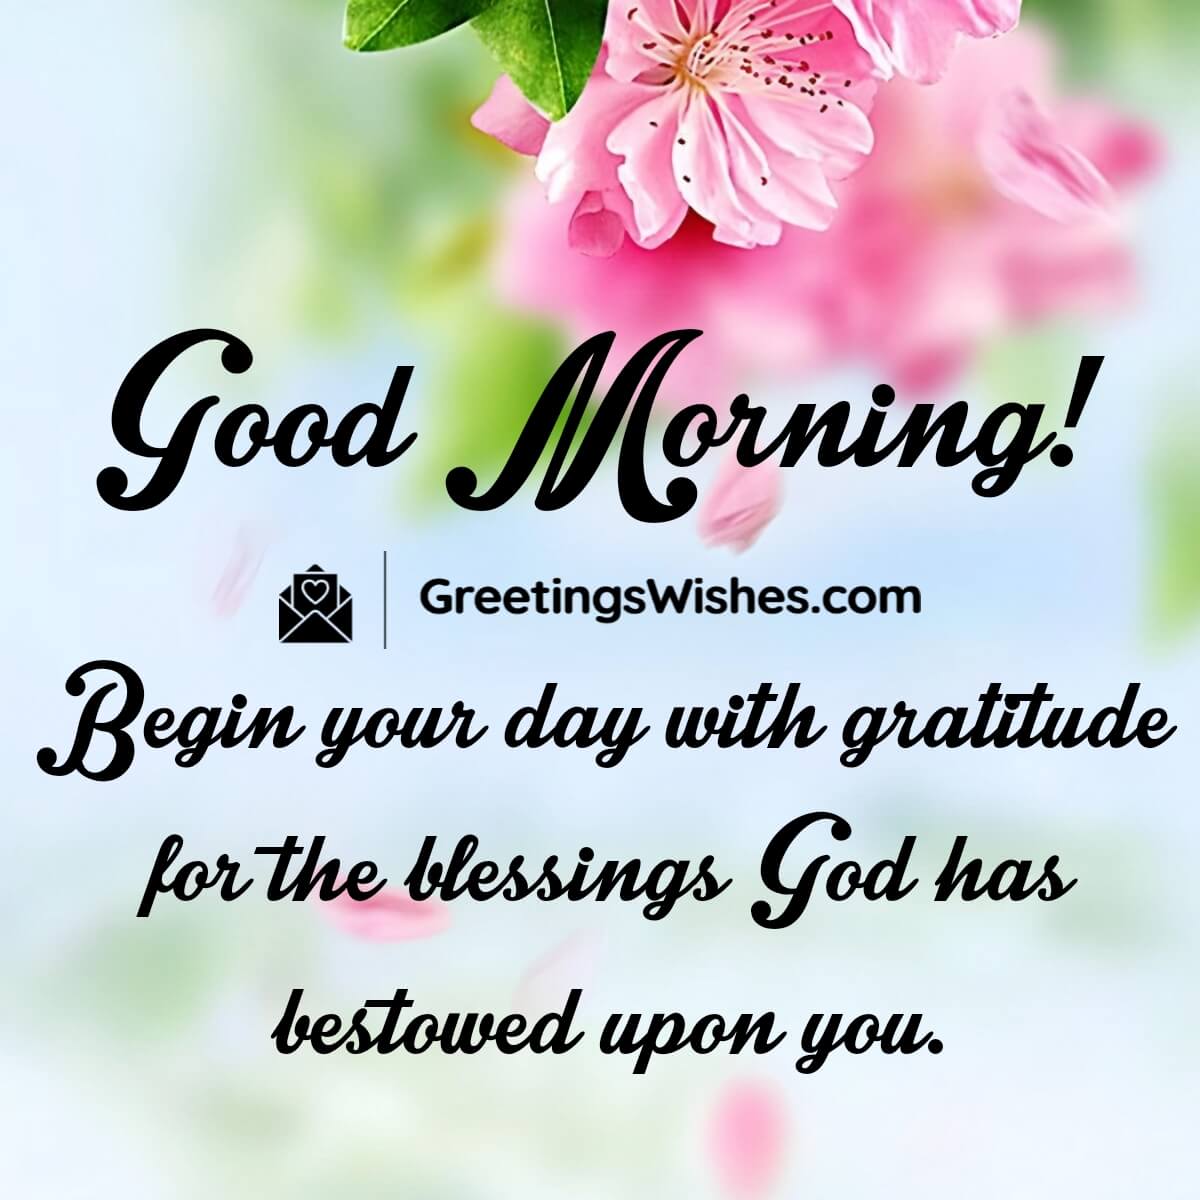 Good Morning God Quotes To Start Your Day - Greetings Wishes